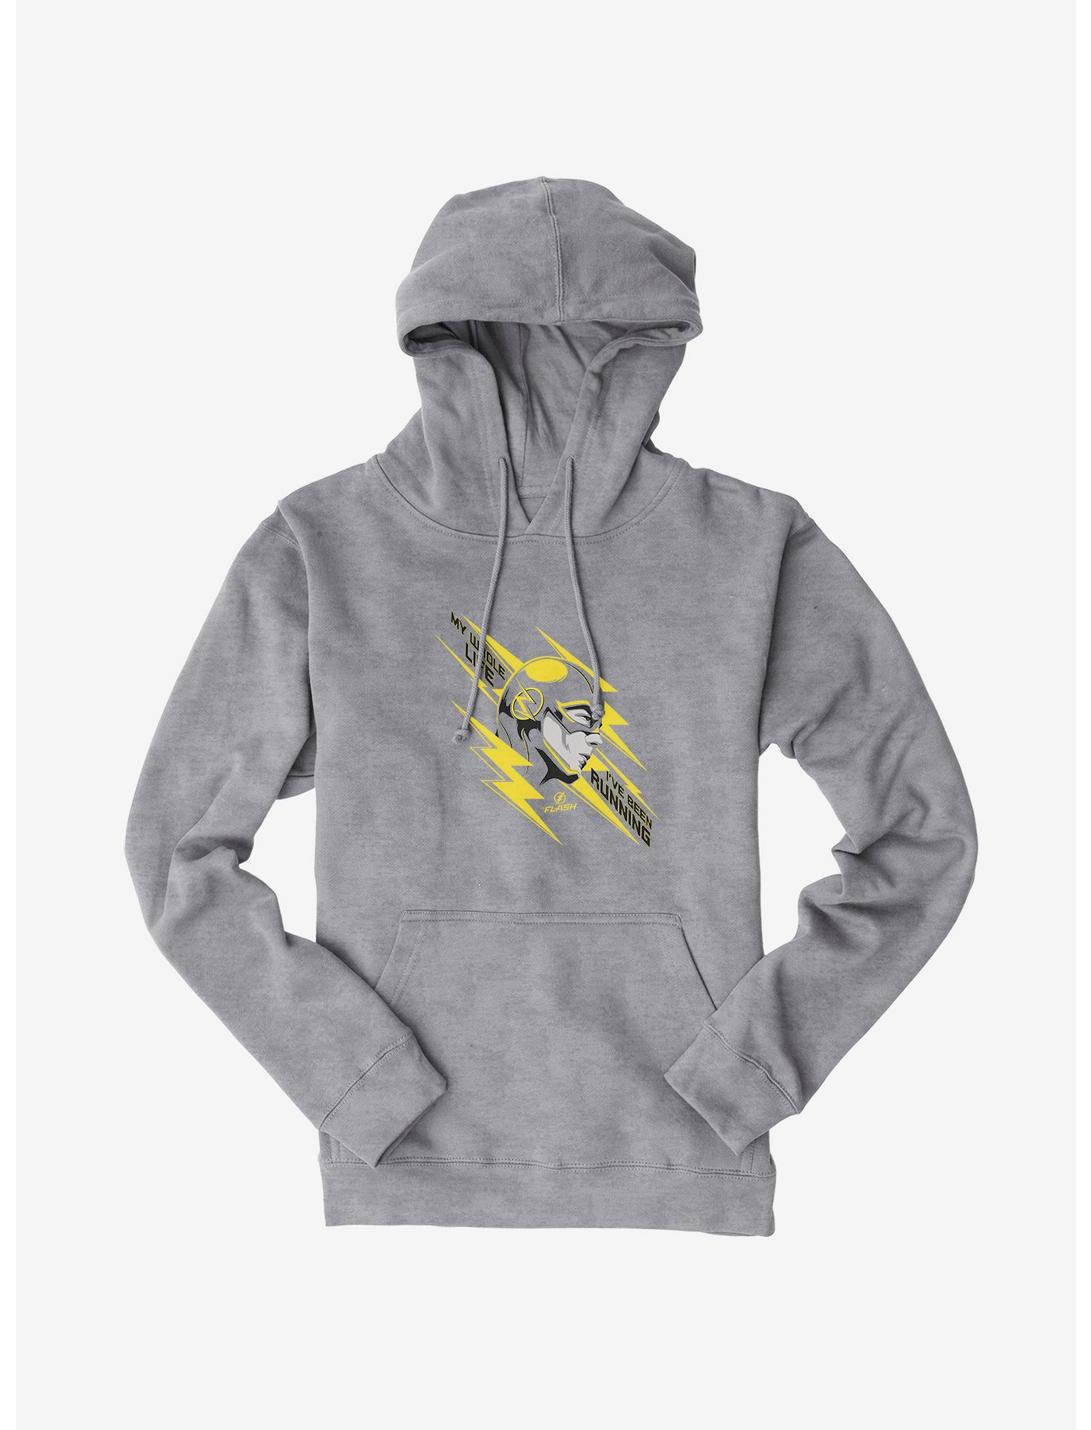 Gray hoodie featuring image of the flash and quote stating my whole life I've been running